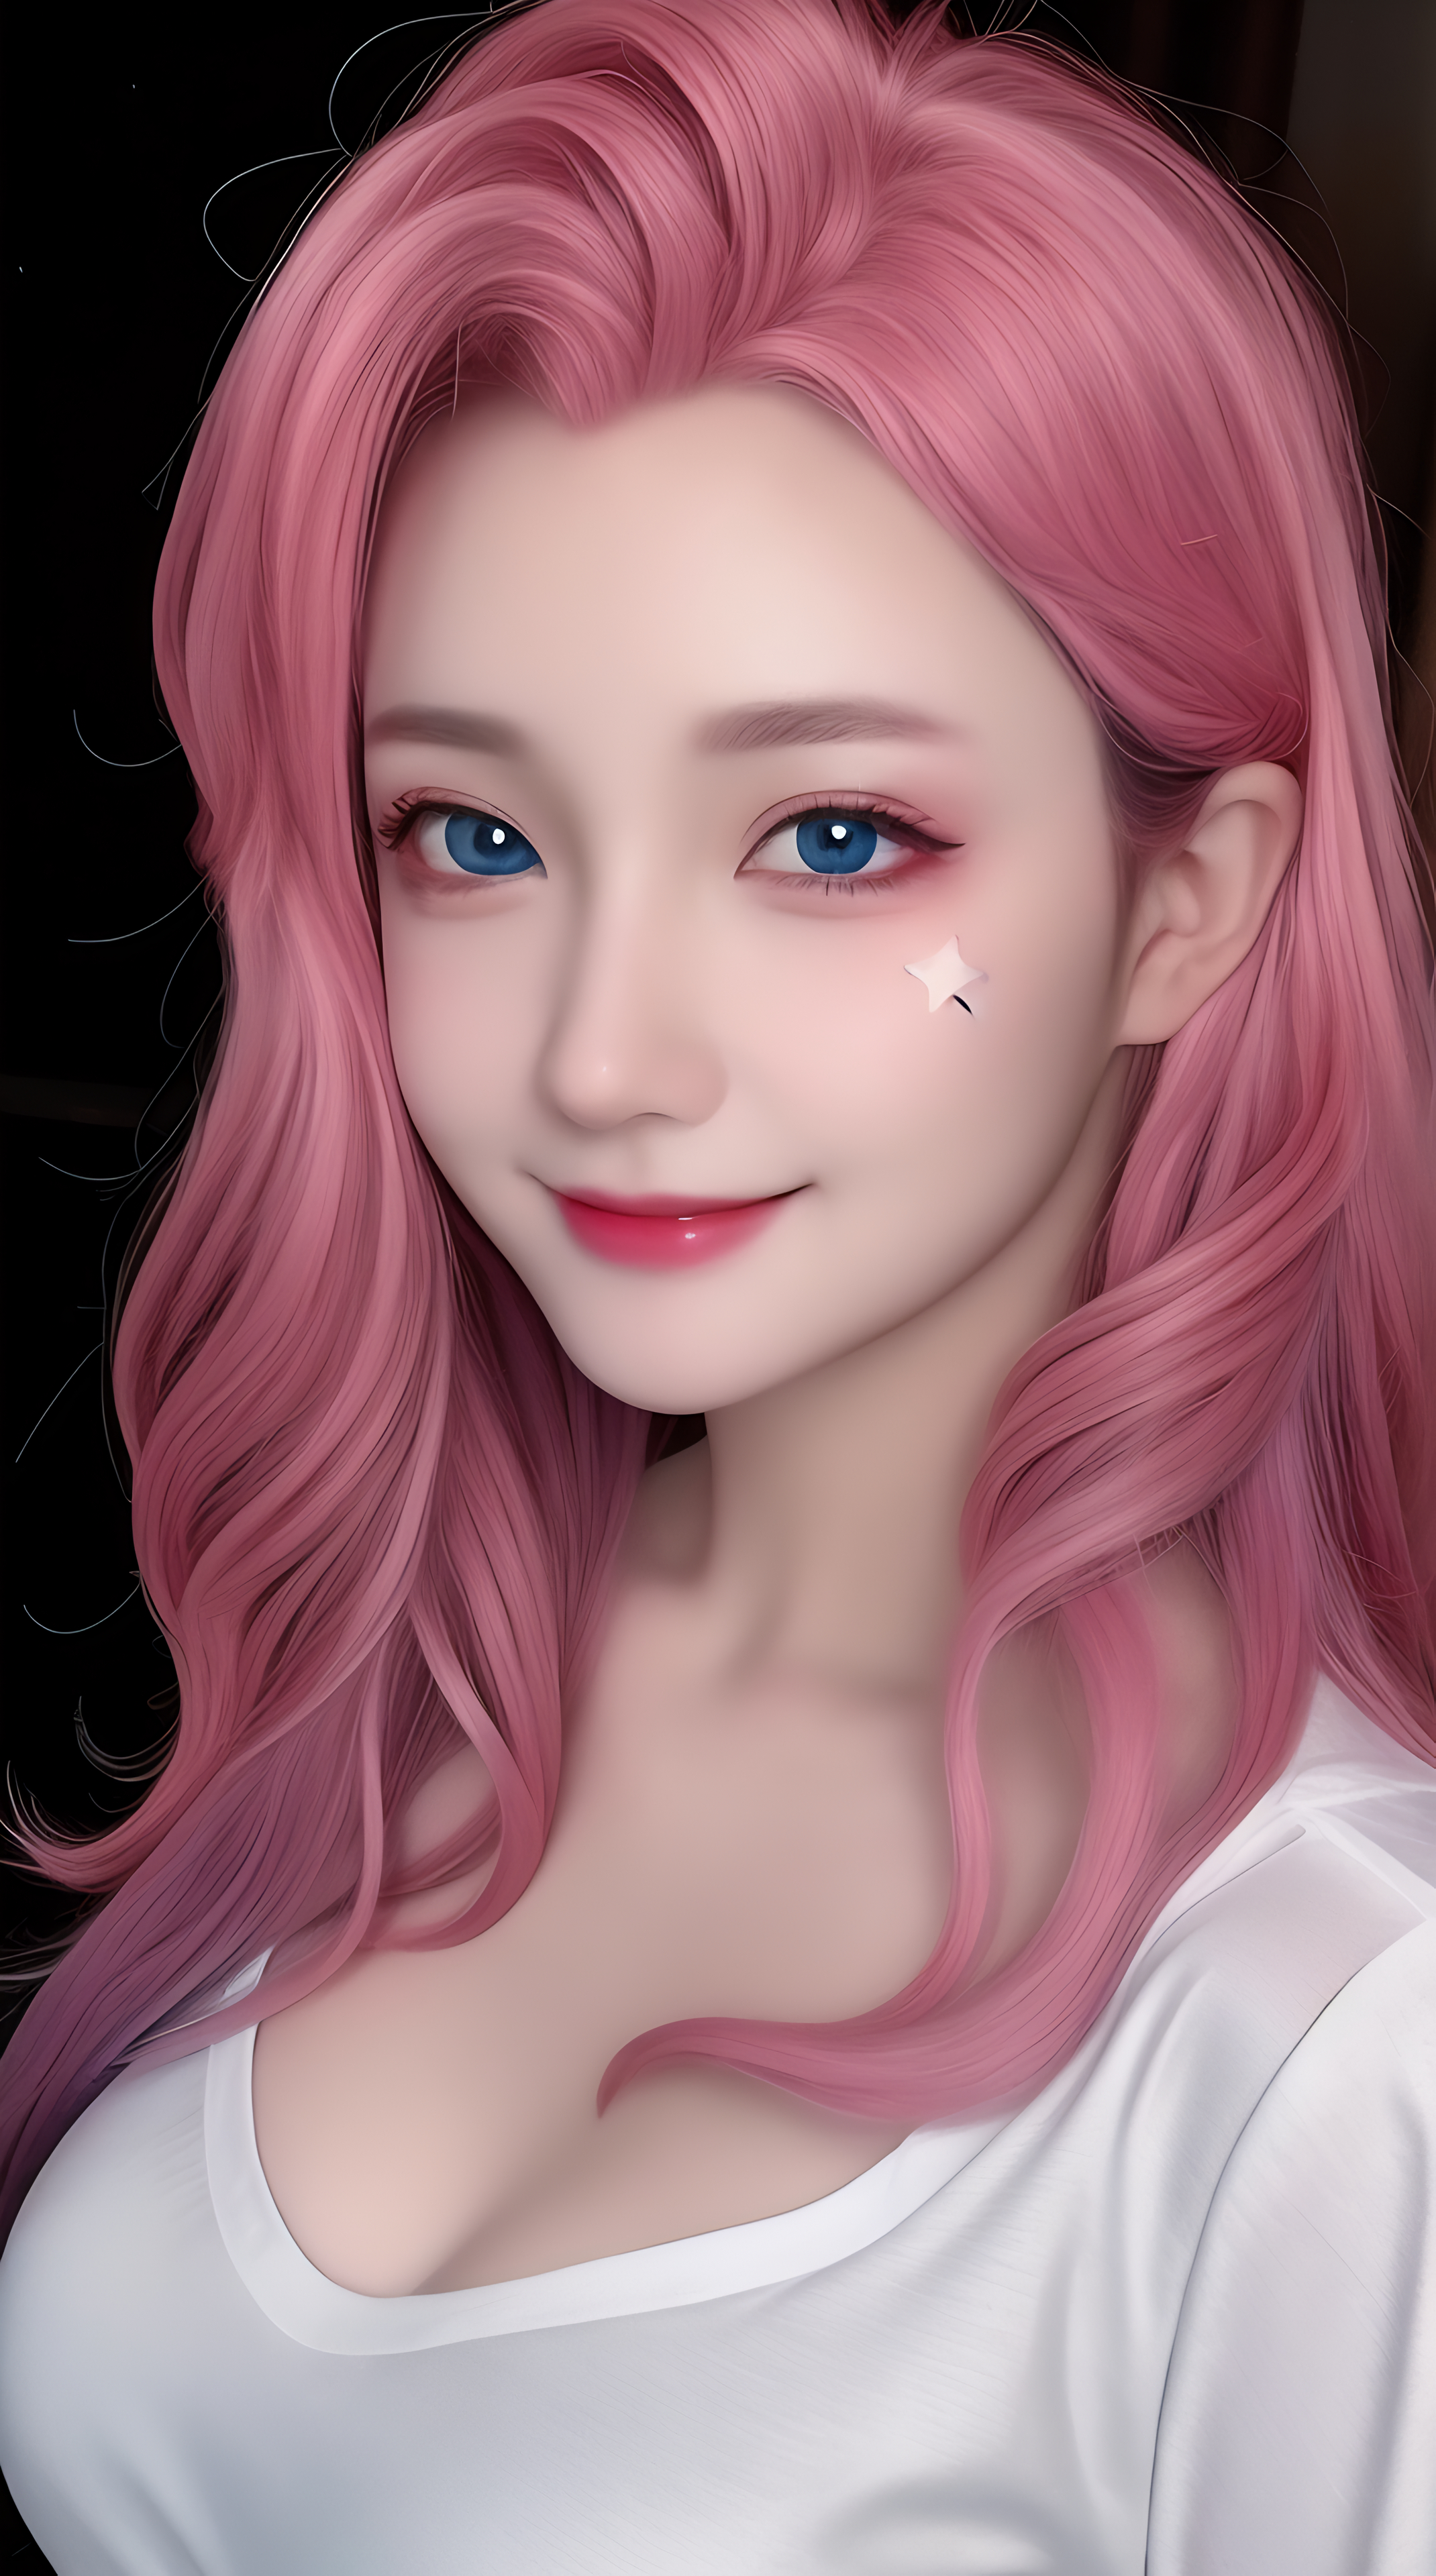 Seraphine League Of Legends League Of Legends Pink Hair Ai Art Vertical Smiling Looking At Viewer 2140x3840